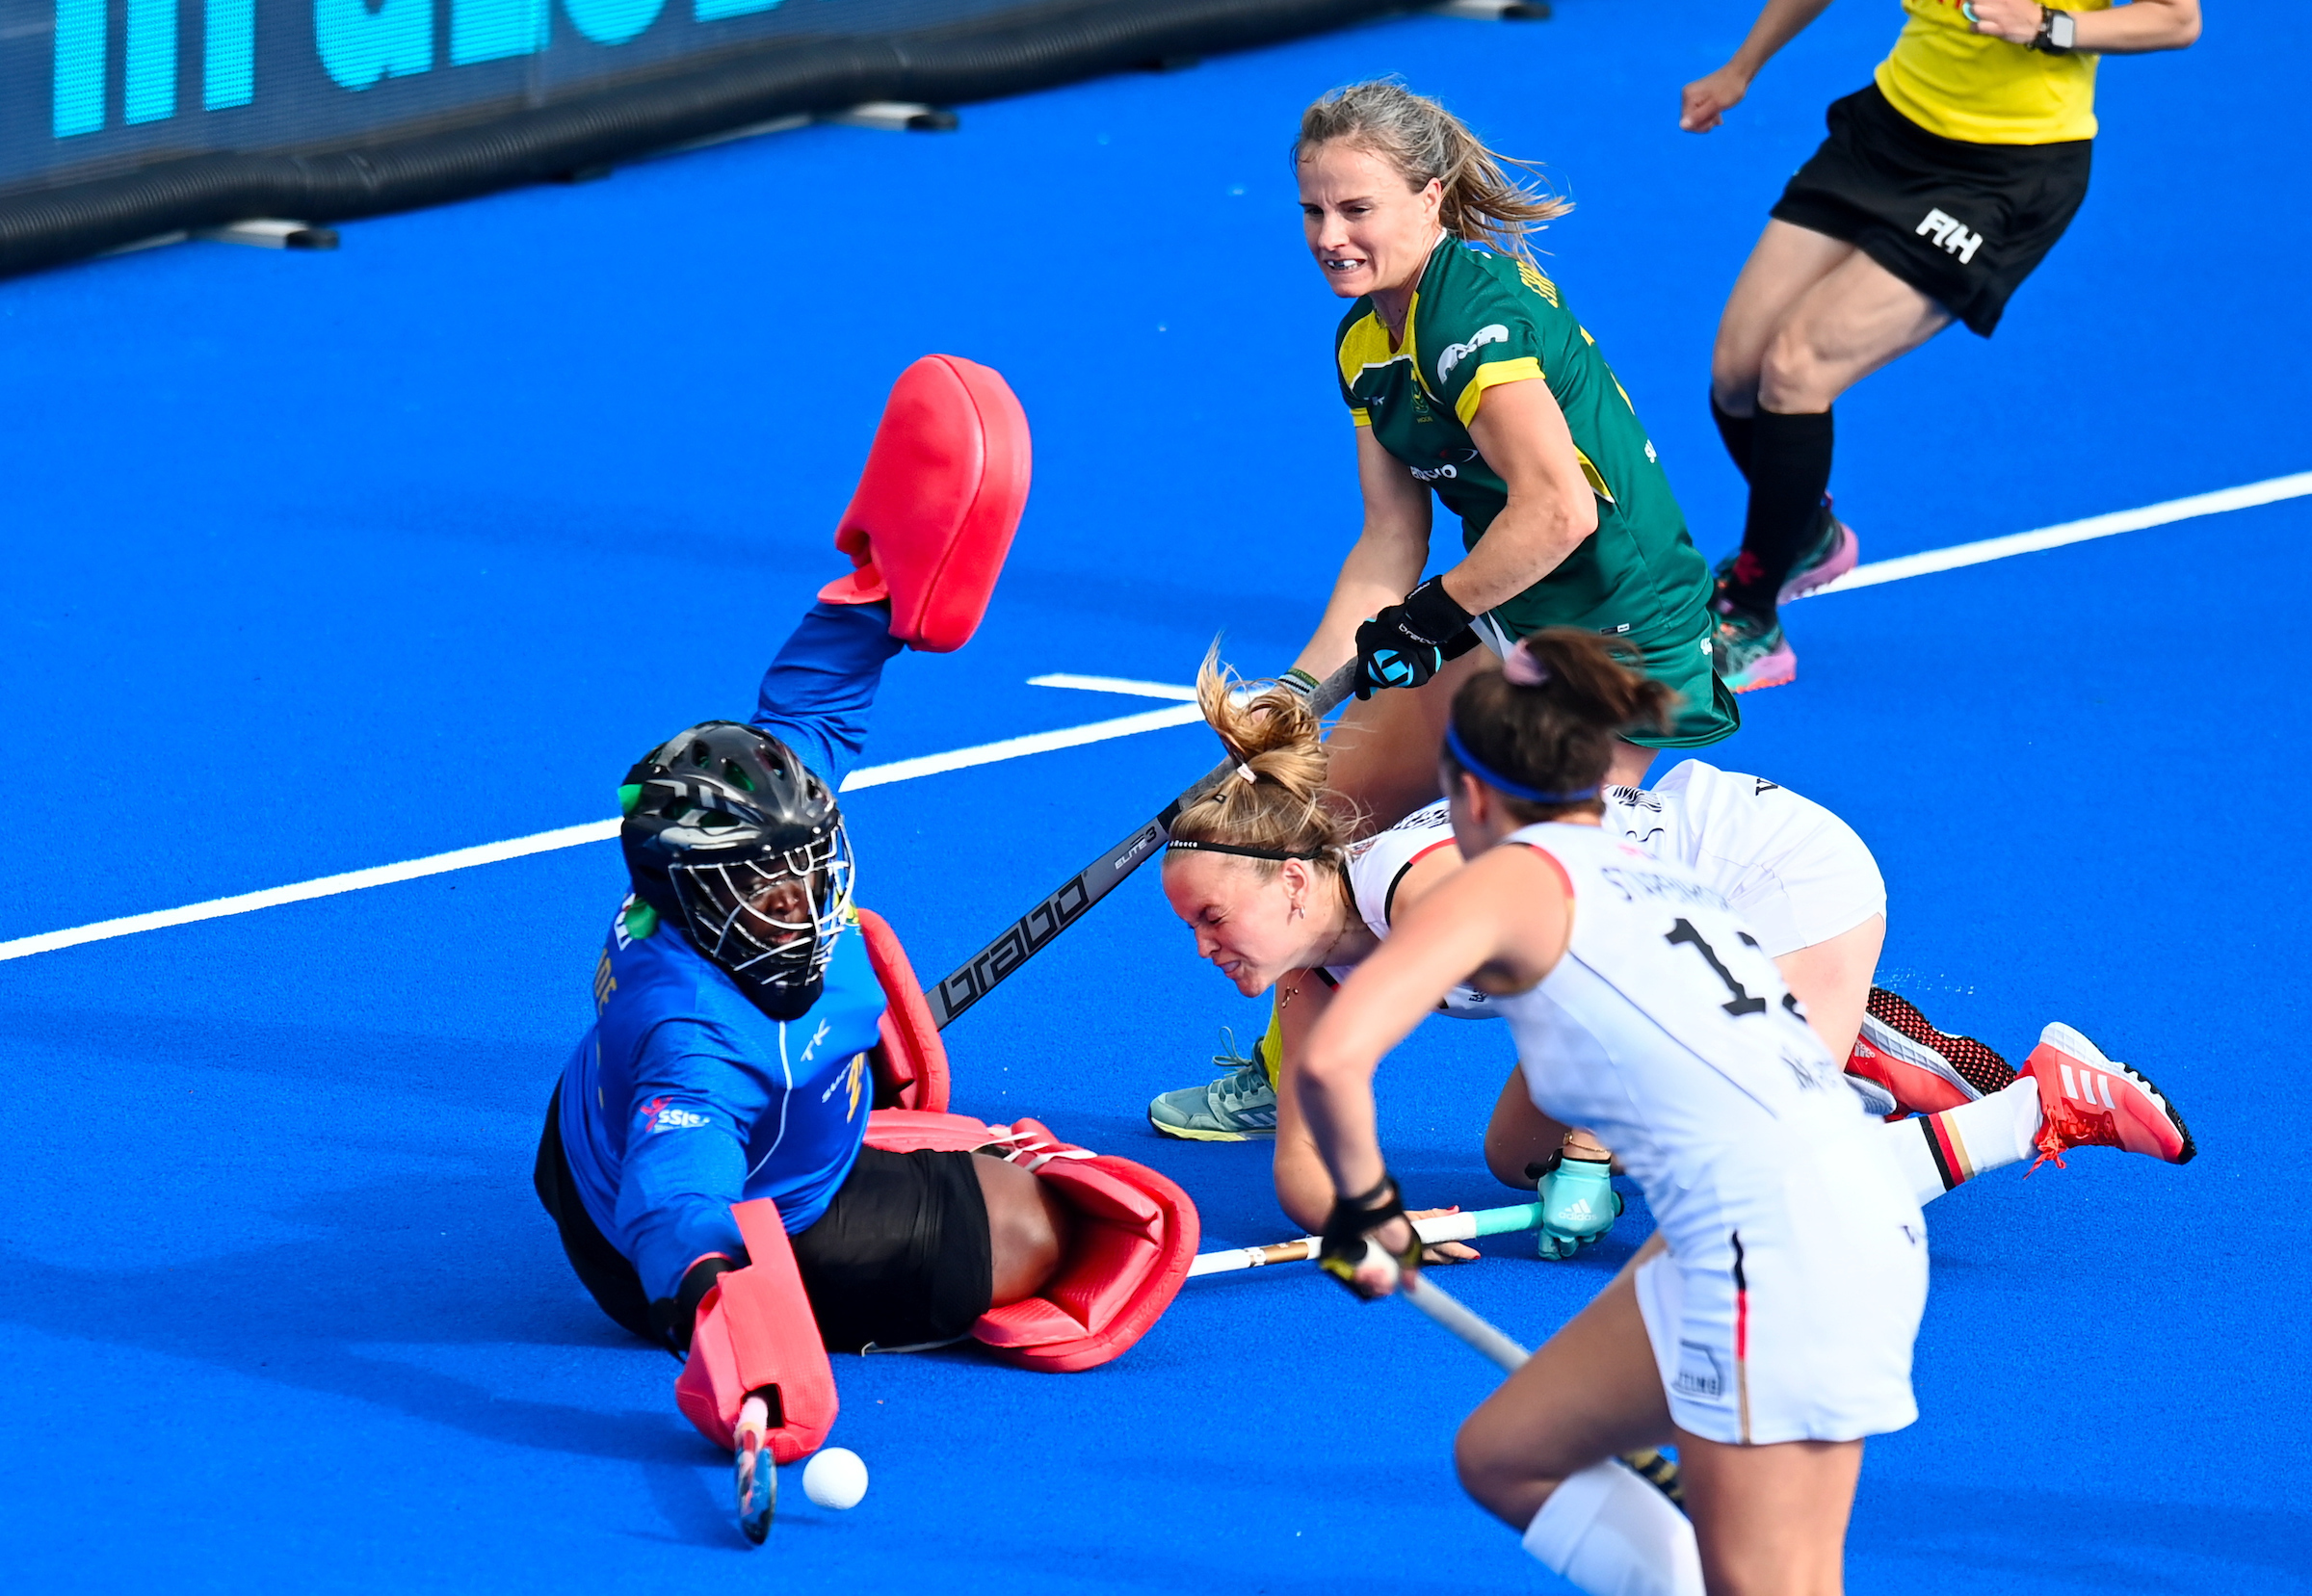 WSP2207092890 - World Cup: Germany Advance Despite Mbande Excellence in South Africa Goal - The German women's national hockey team reached the quarter-finals of the World Cup with a 1-0 win in the crossover game against South Africa. In a long time – at least in terms of the result - the German team was superior in a tight game. Only the numerous missed chances and penalty corners prevented clear conditions prevailing early on in the game. Nike Lorenz scored the decisive goal (38th minute) after a penalty corner. The next opponent of the German team is New Zealand on Tuesday, July 12th, 5:00 p.m.